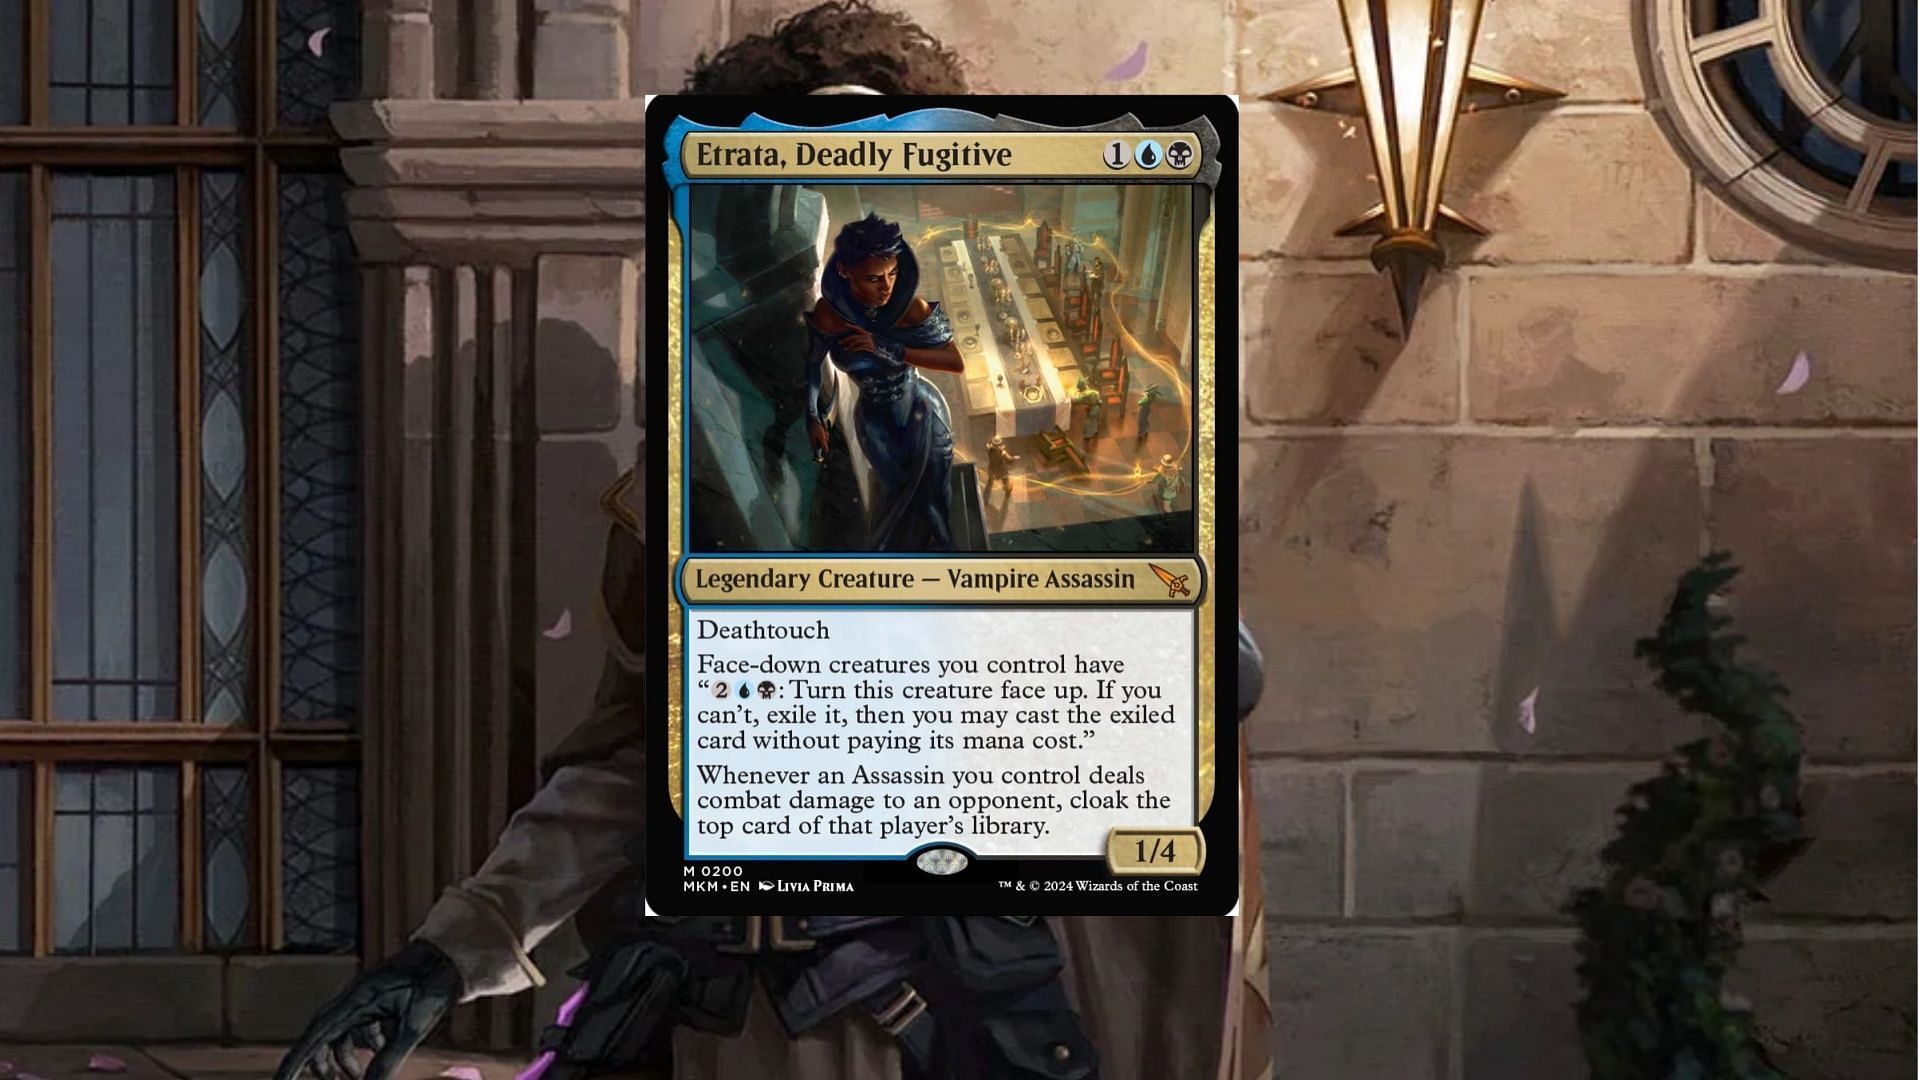 Etrata, Deadly Fugitive in MTG (Image via Wizards of the Coast)